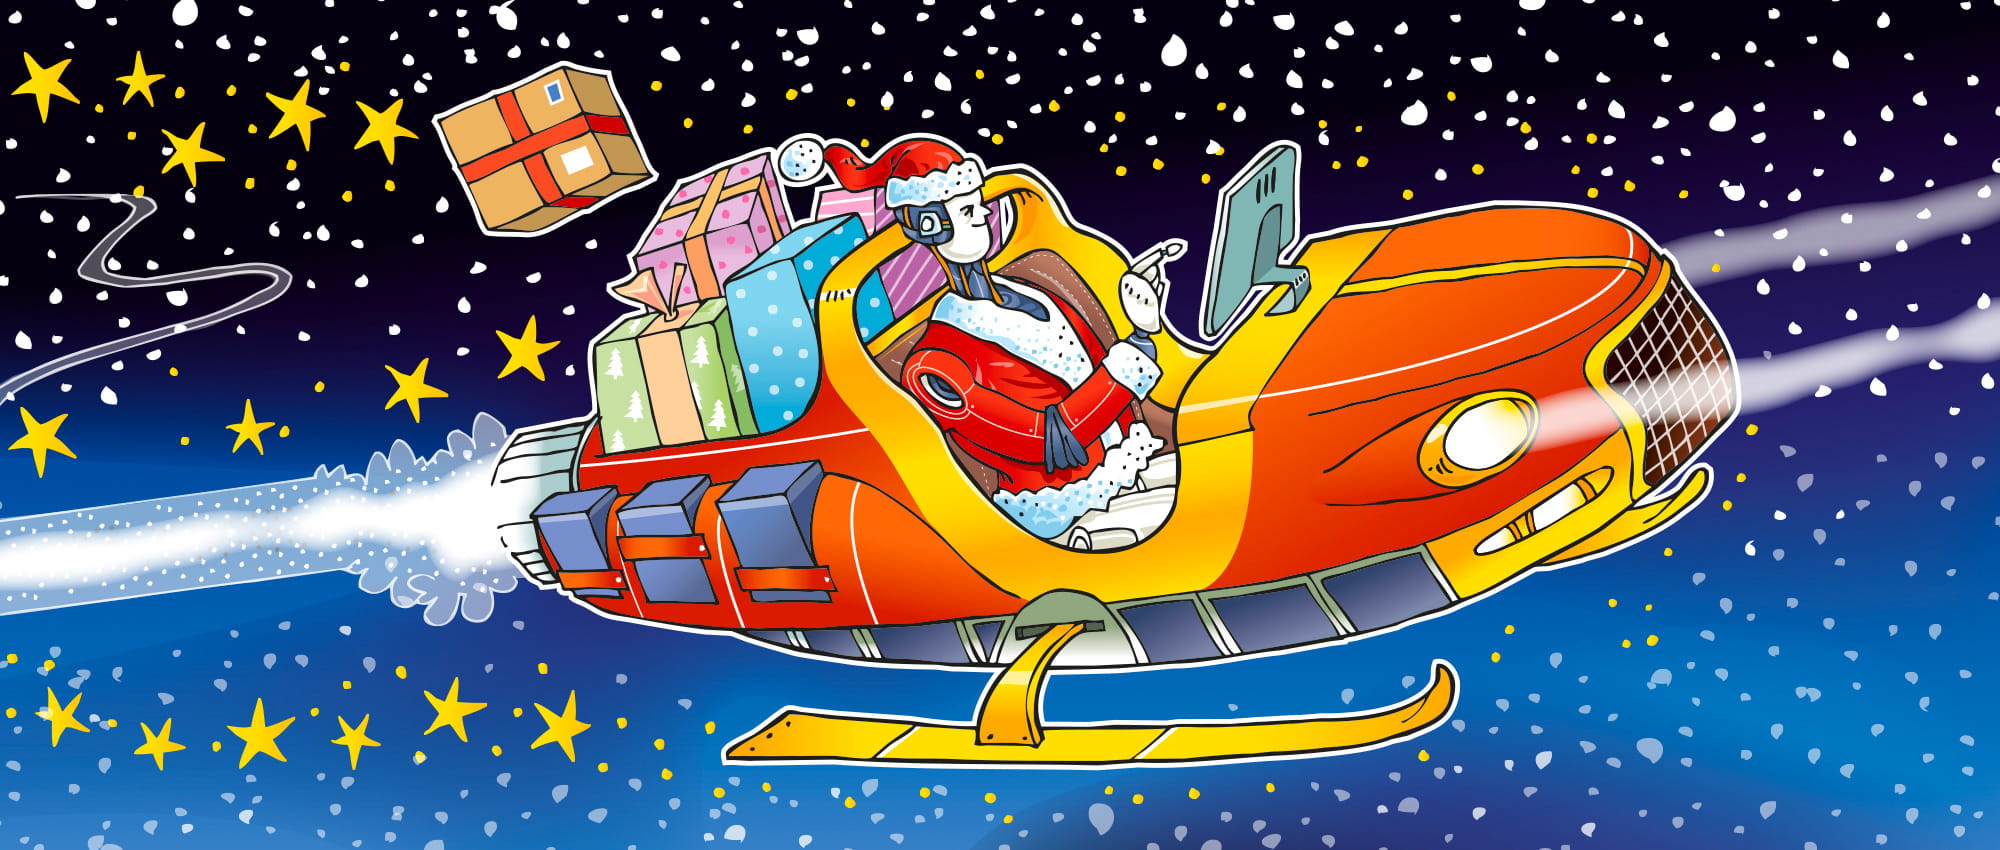 Robot Father Christmas driving through the starry sky in a modern car-like sleigh with presents and clicking on a screen attached to the sleigh.